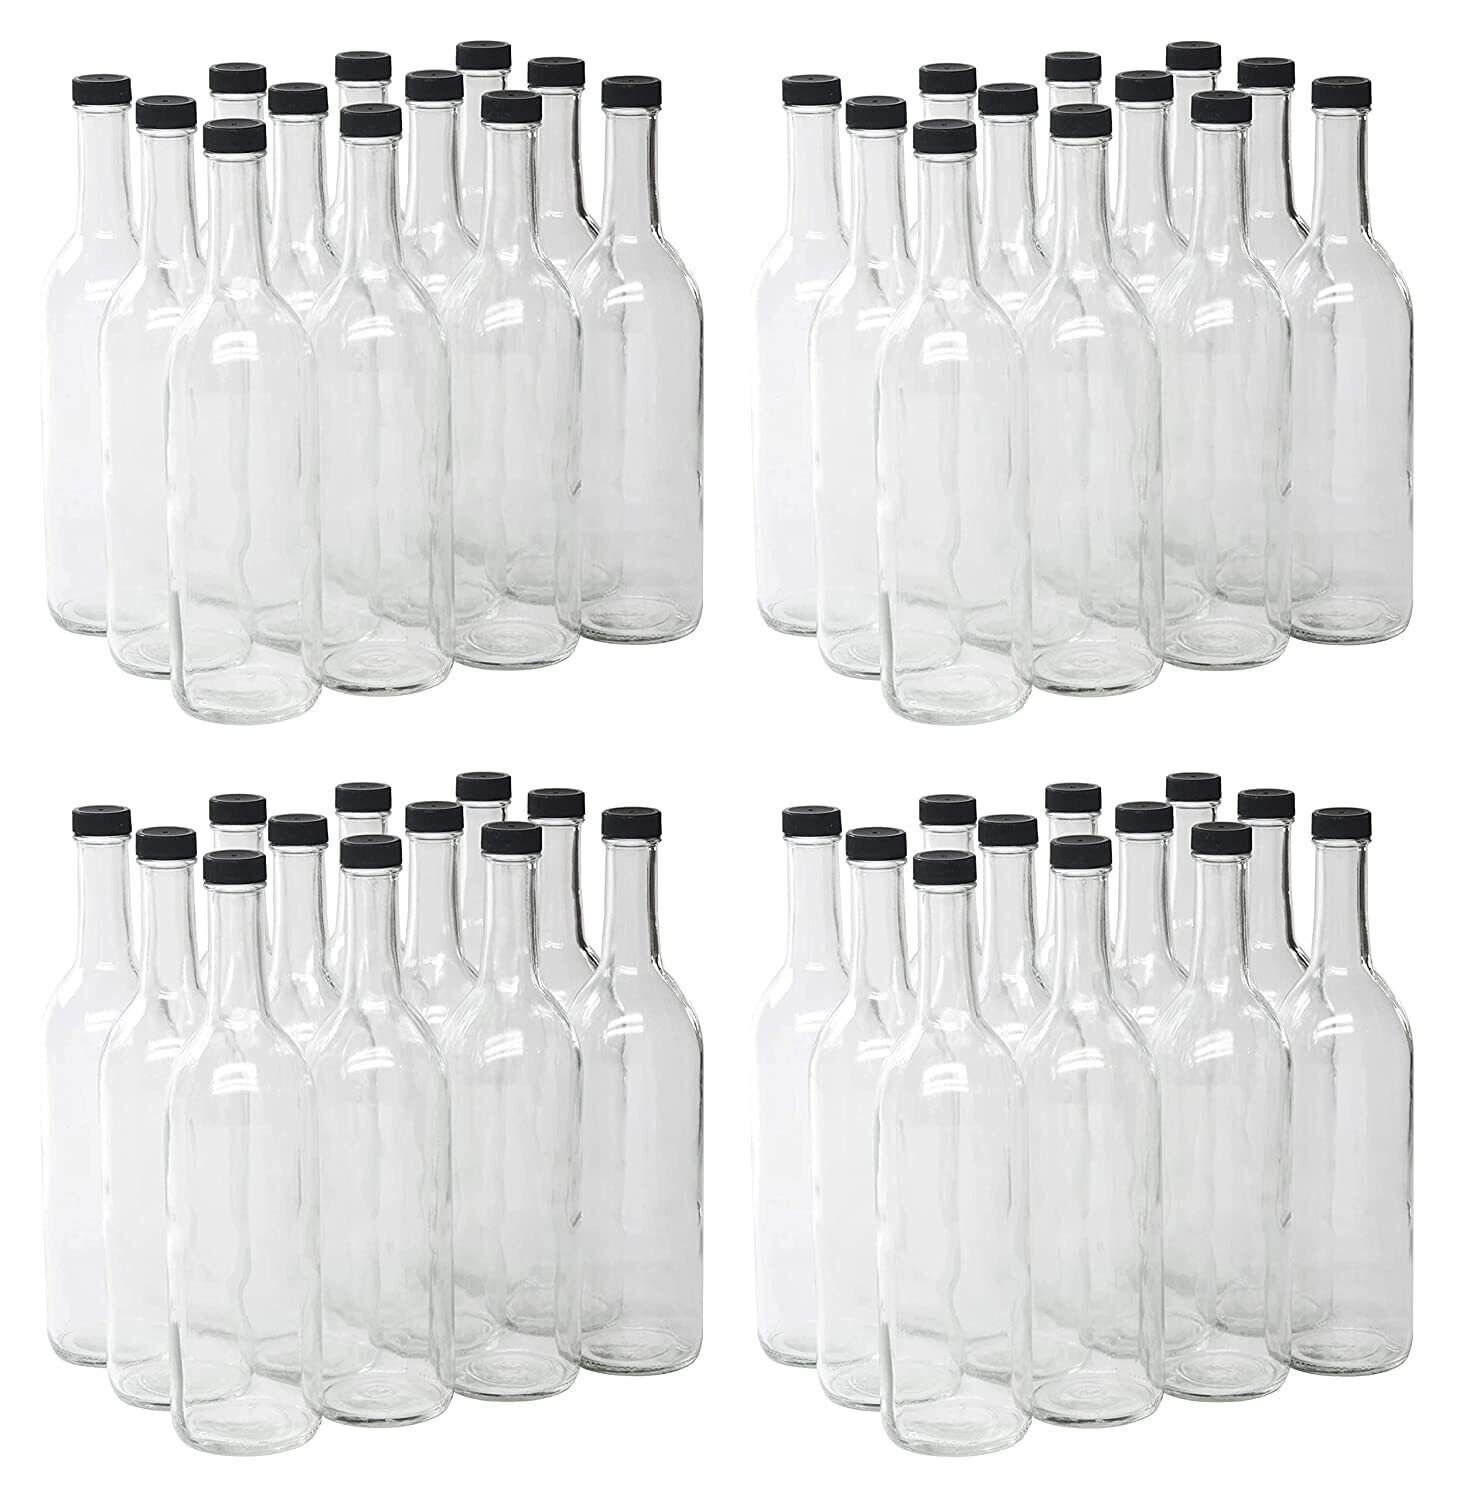 750ml Clear Glass Bordeaux Wine Bottle Flat-Bottomed Screw-Top Finish - with ...